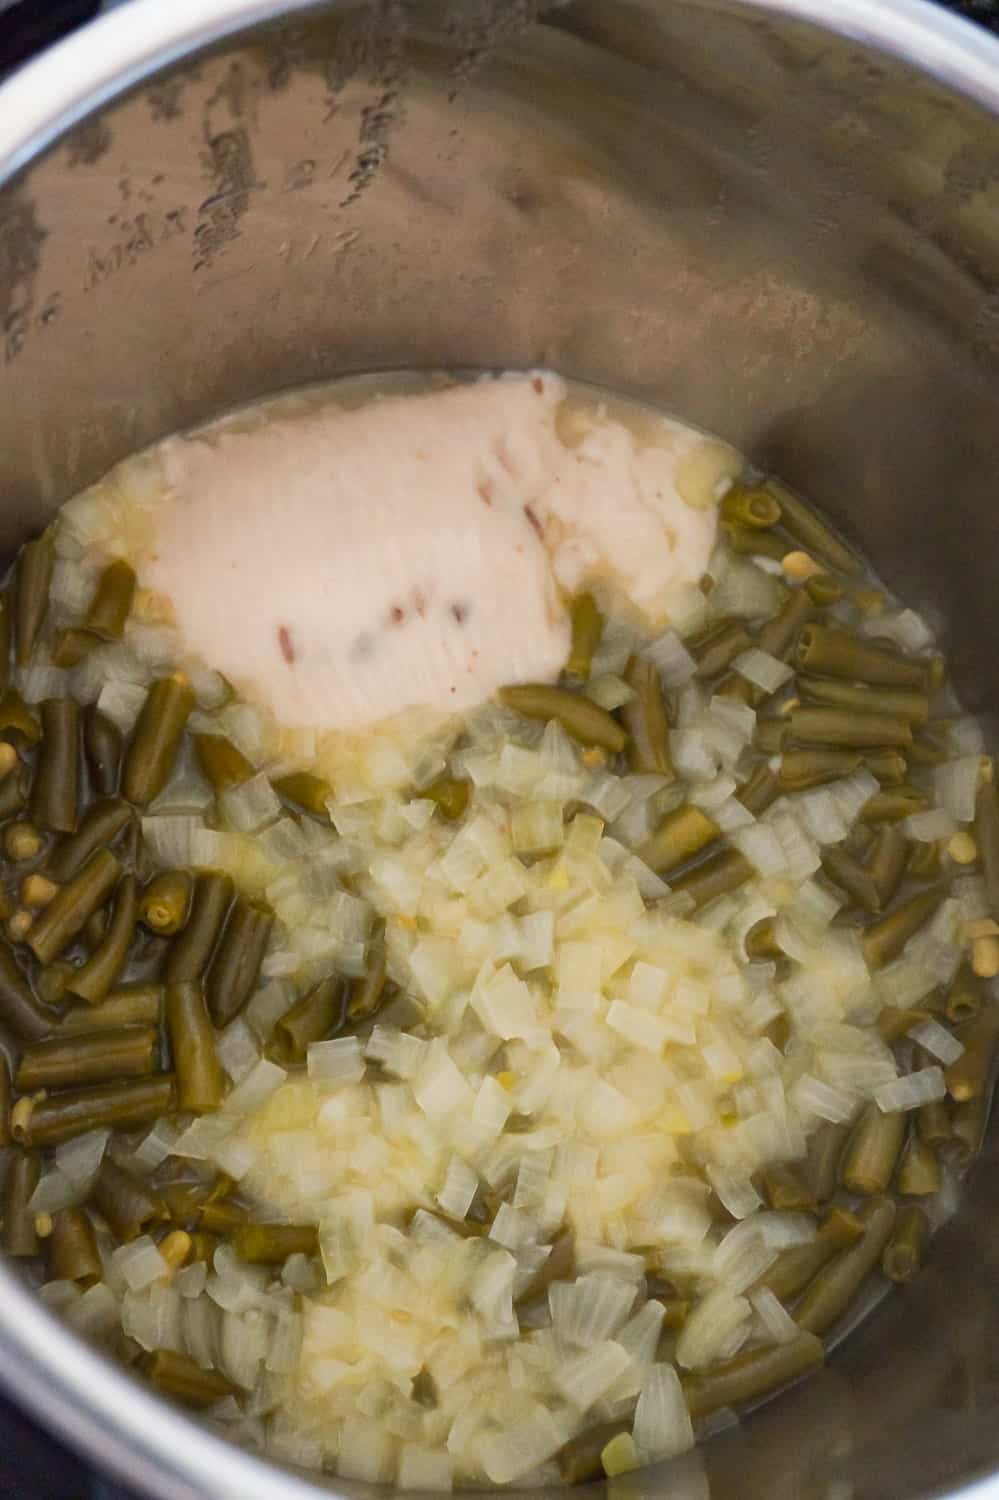 cream of mushroom soup, diced onions and green beans after cooking in an Instant Pot